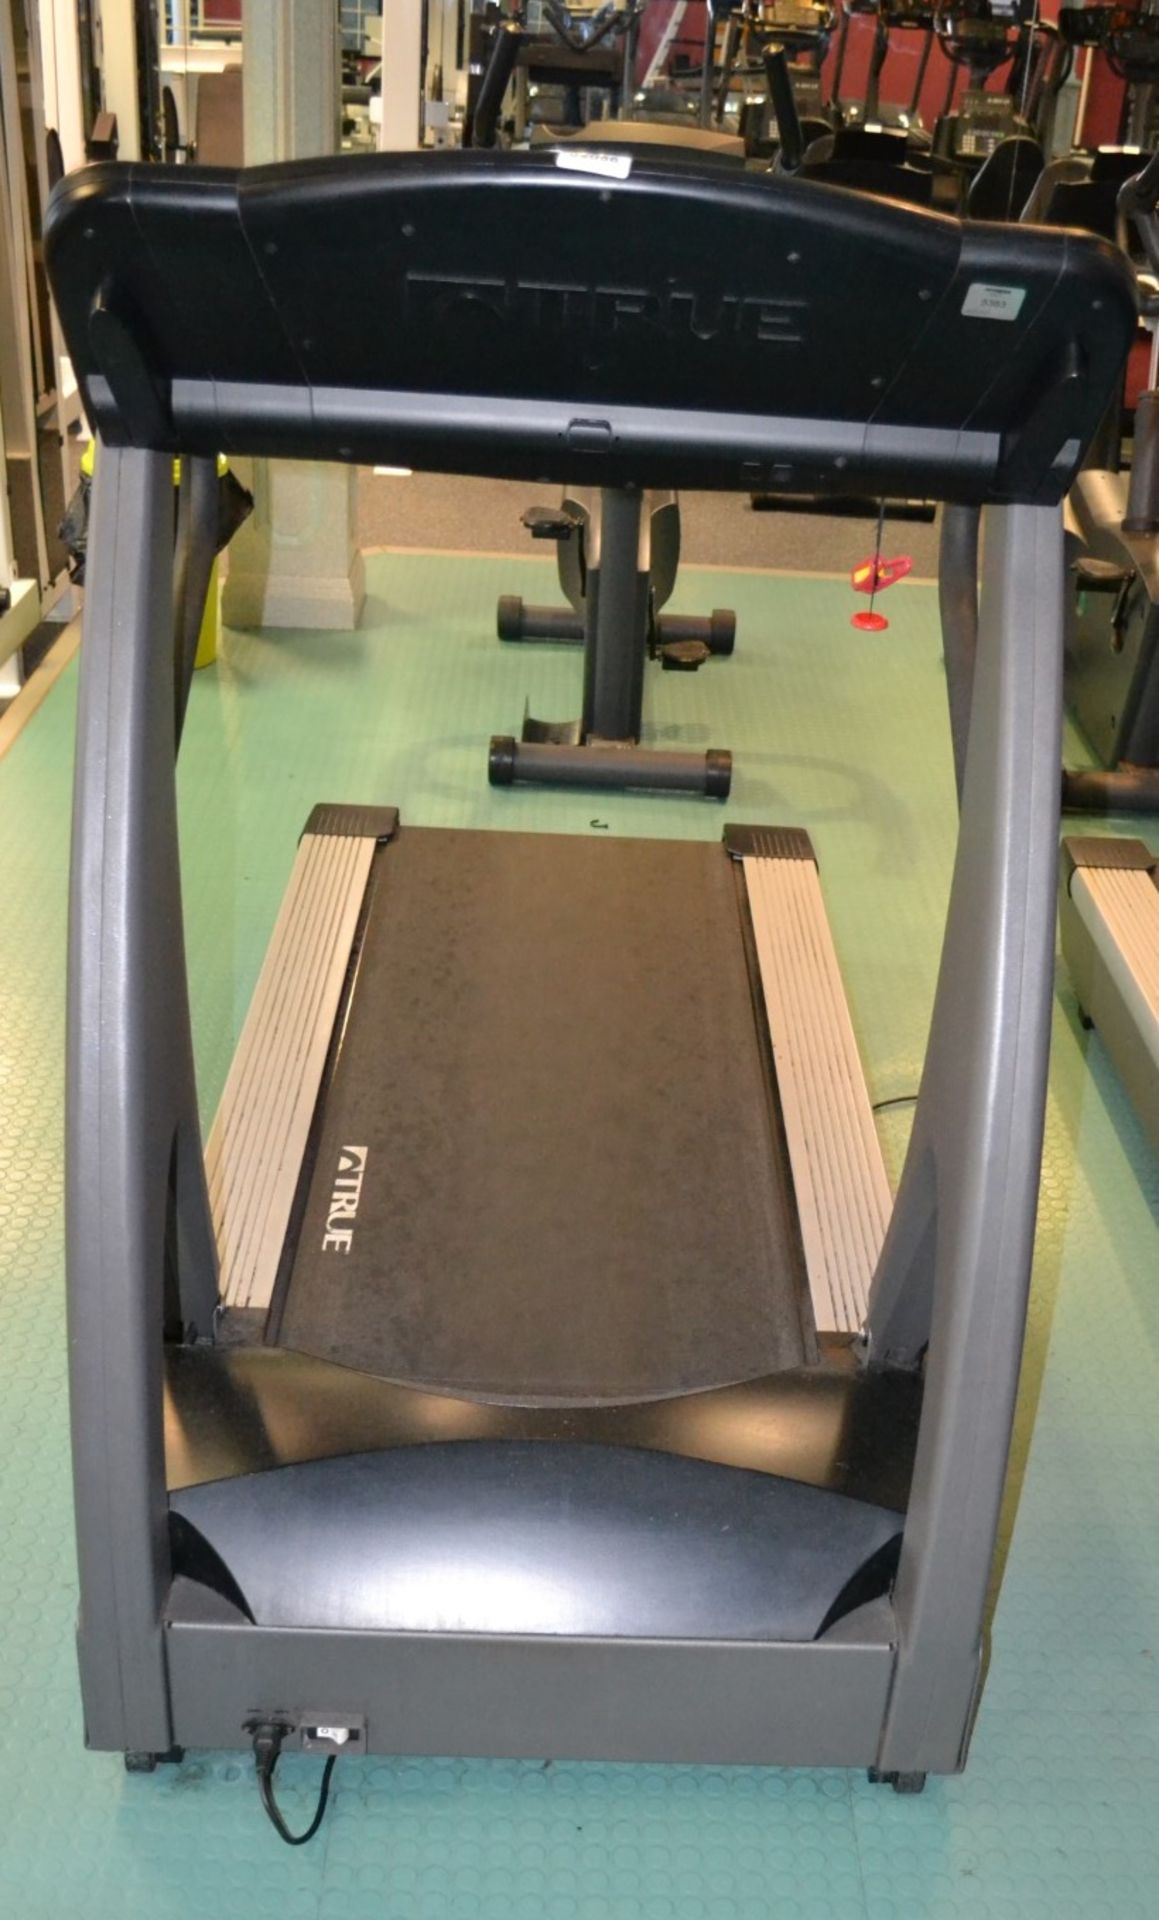 1 x True Fitness Commercial Treadmill With Heart Rate Control - Dimensions:L200 x W85 x H150cm - - Image 3 of 3